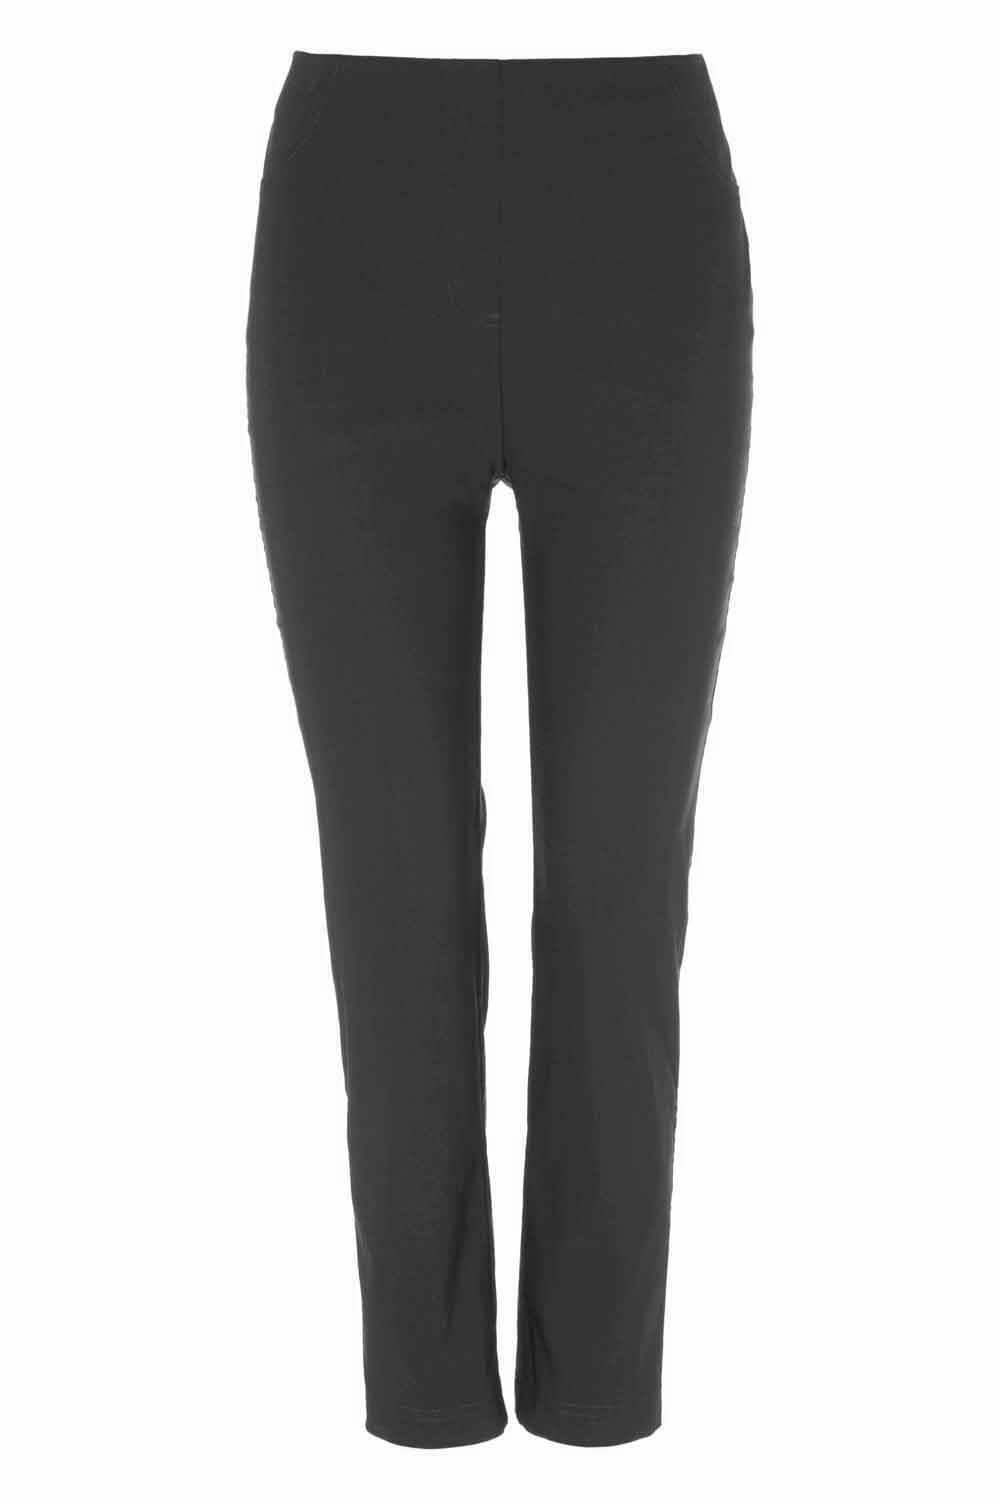 Black 3/4 Length Stretch Trouser, Image 5 of 5